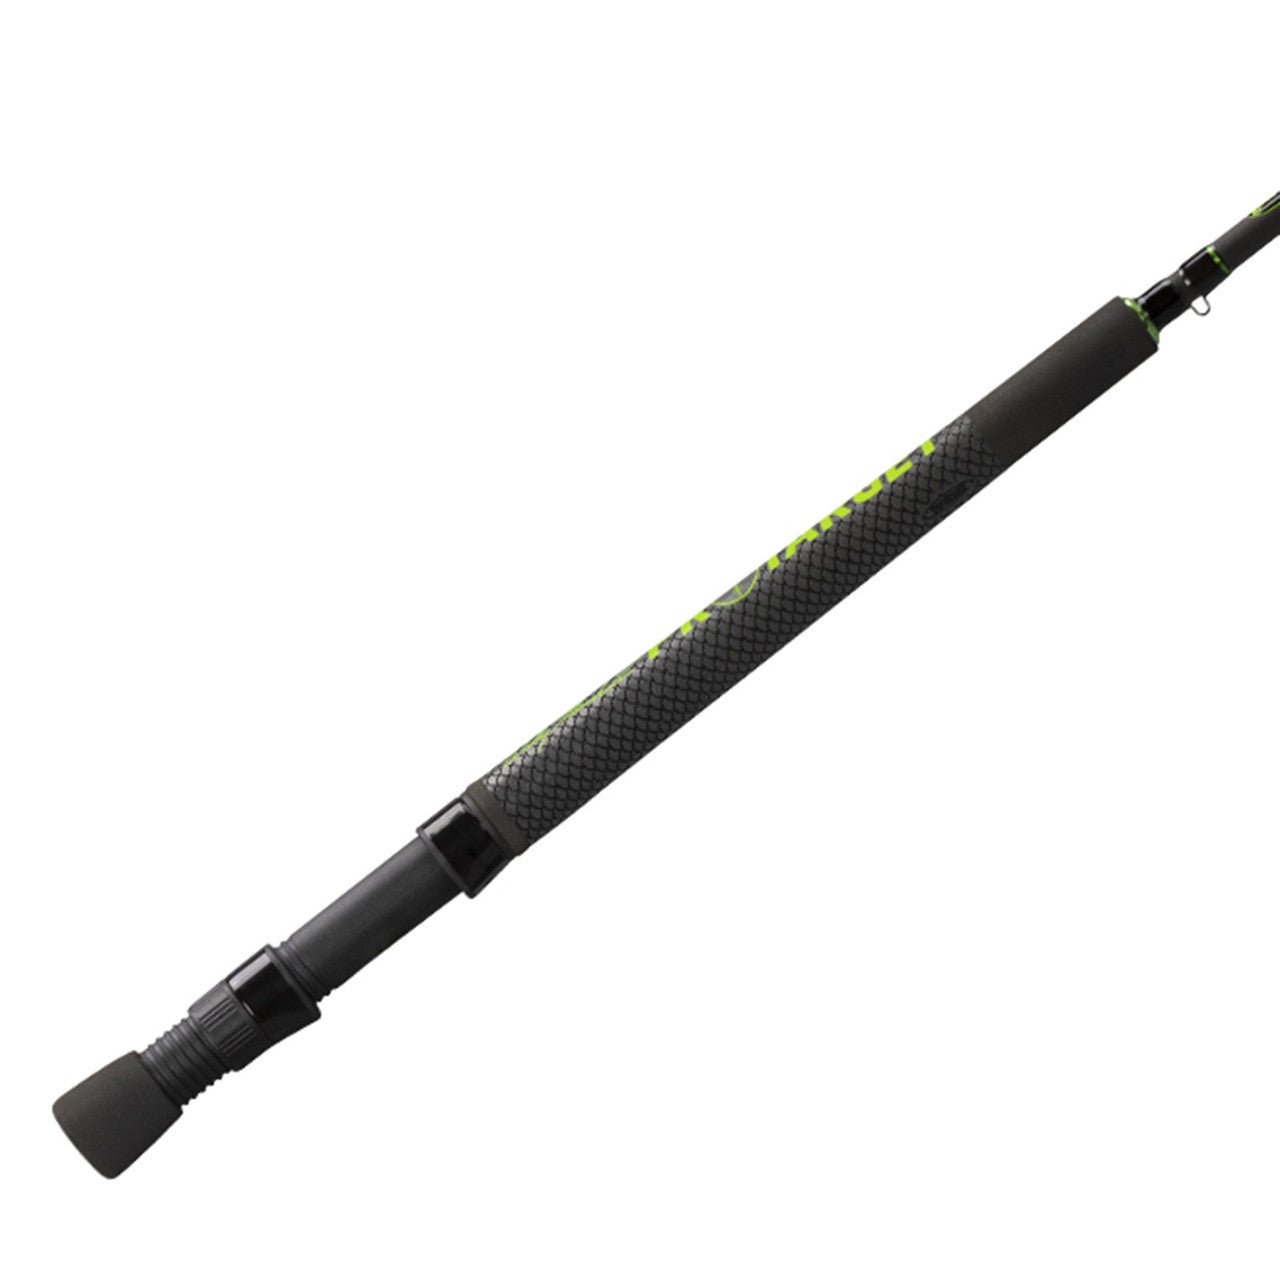 Lew's Wally Marshall Pro Target Crappie Rod - Hamilton Bait and Tackle